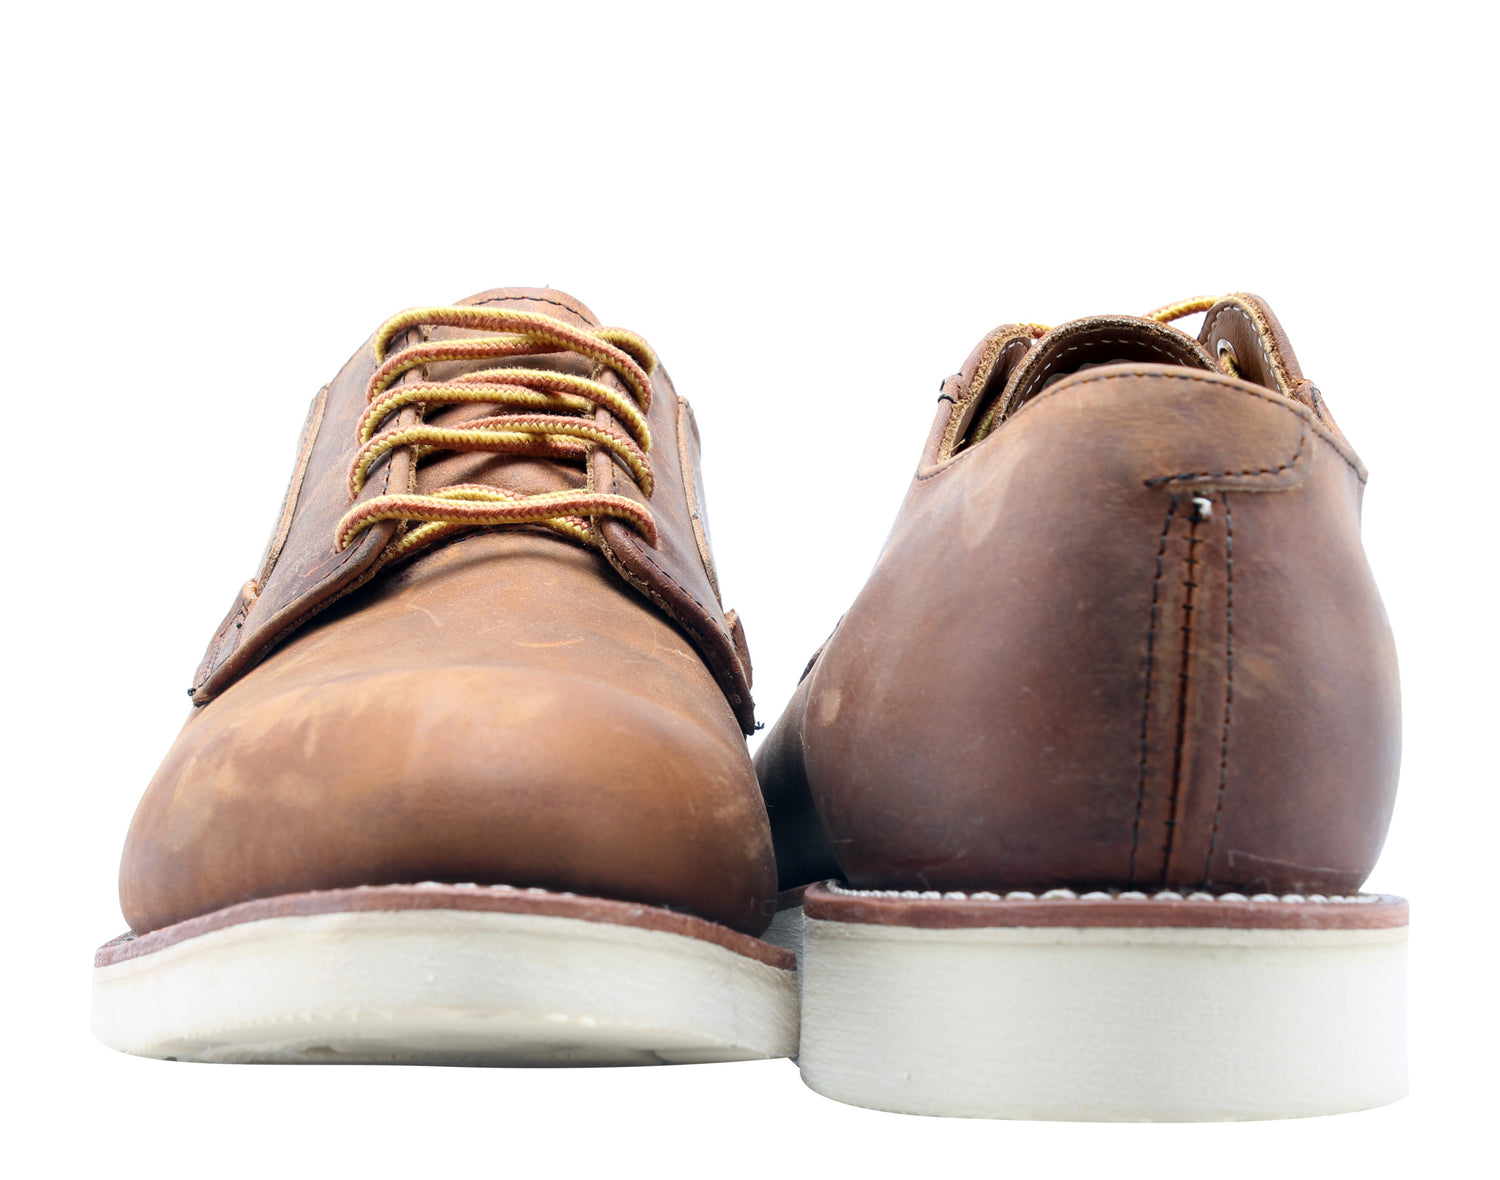 Red Wing Heritage Postman Oxford 3107 Men's Shoes